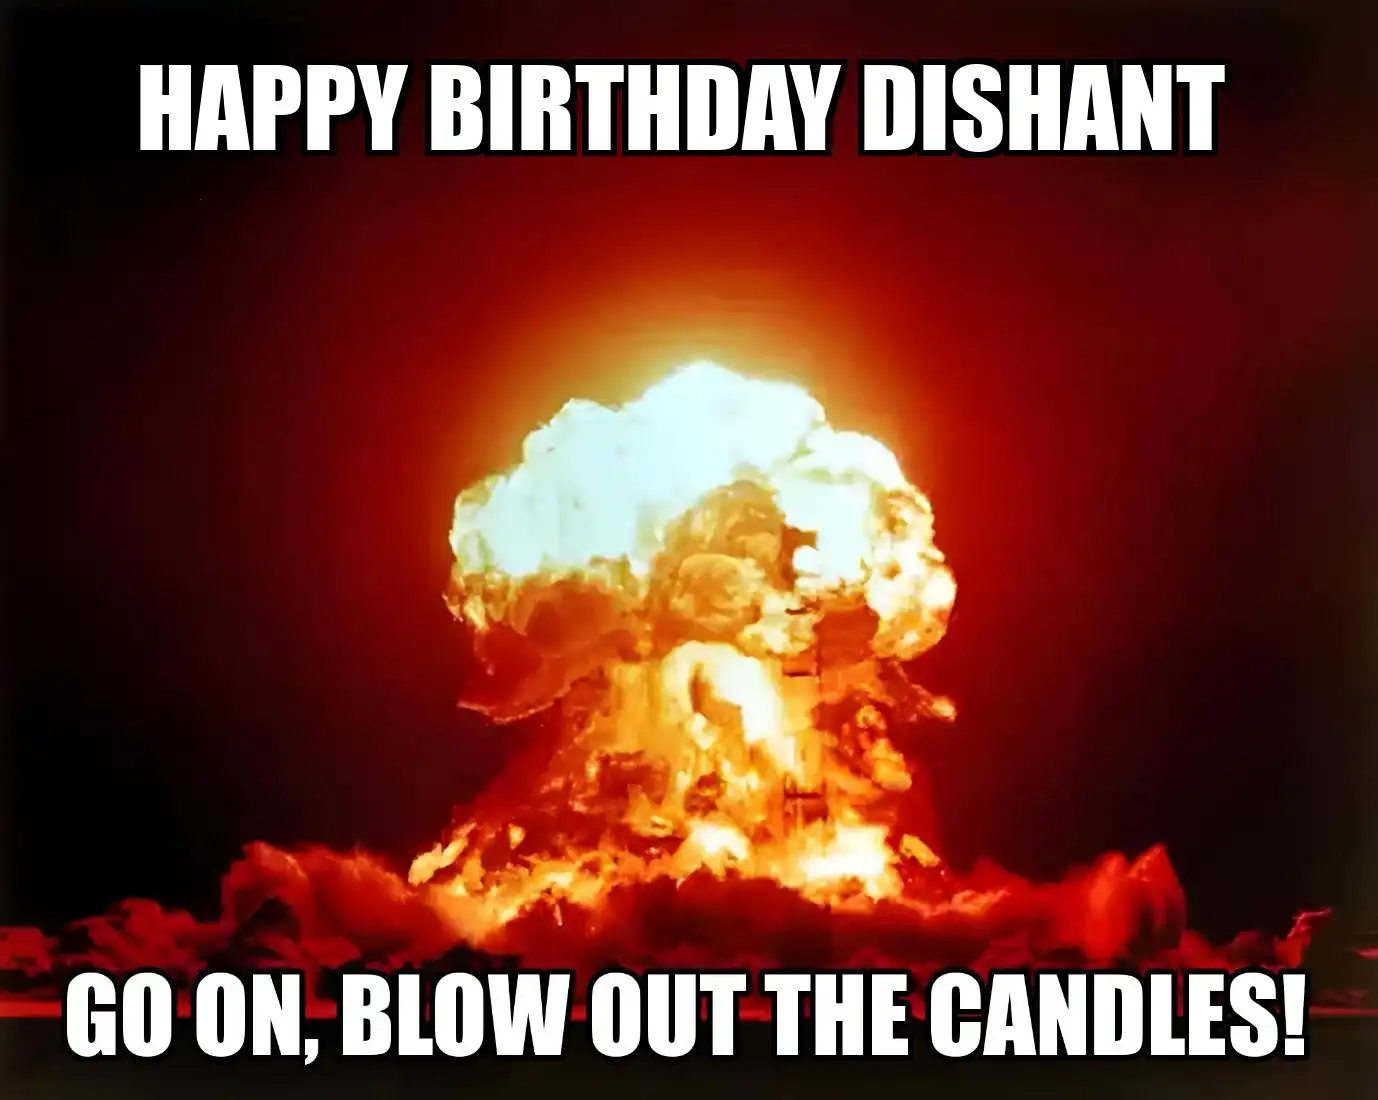 Happy Birthday Dishant Go On Blow Out The Candles Meme